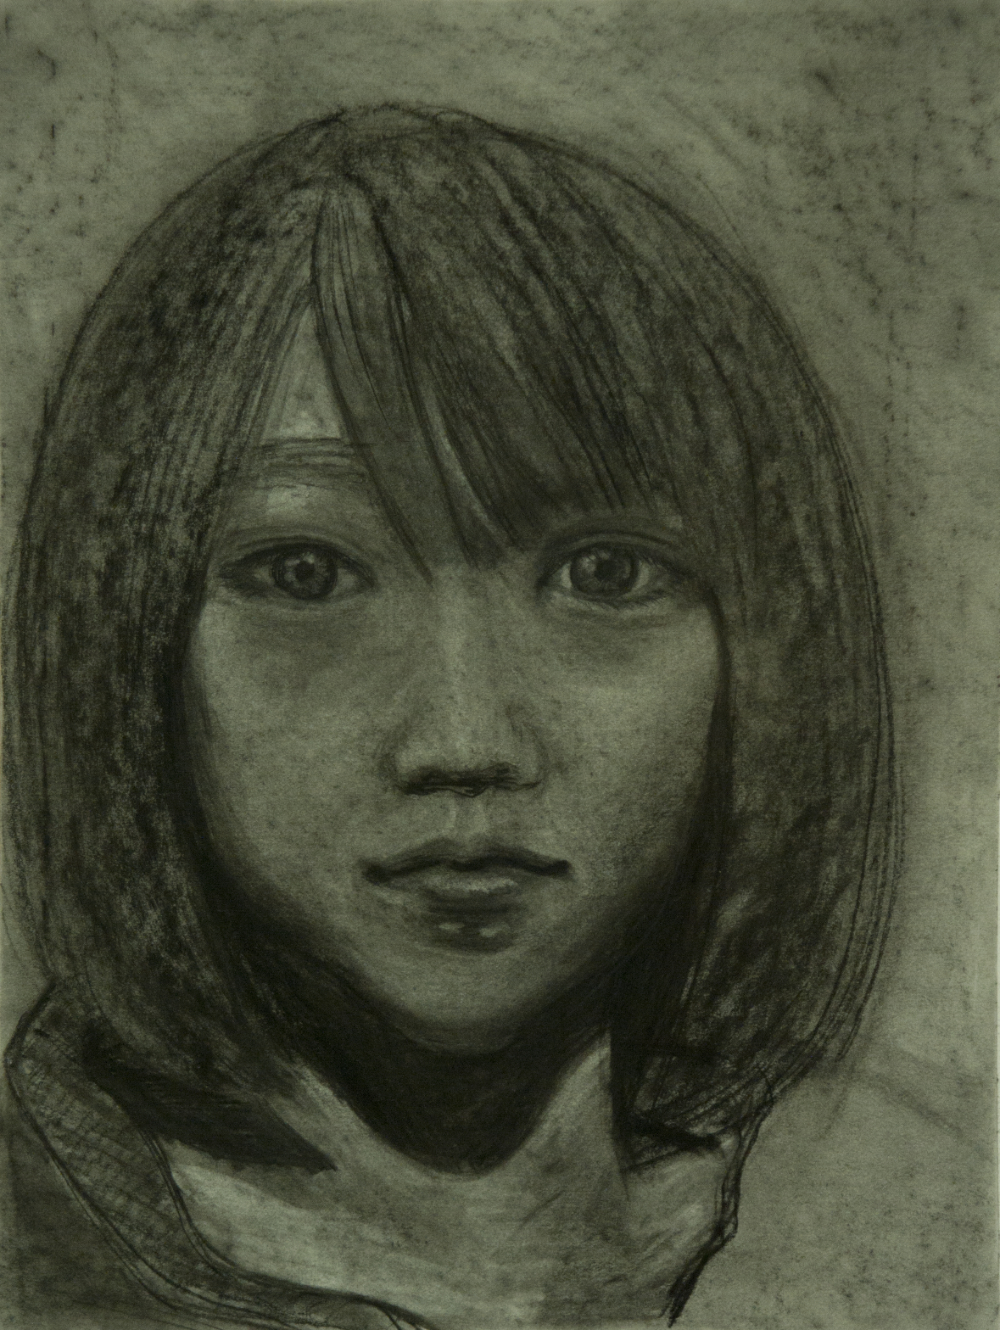 thumbnail of Self-Portrait by Rumei Ye. medium: charcoal. date: 2011. dimensions: 18 x 24 inches